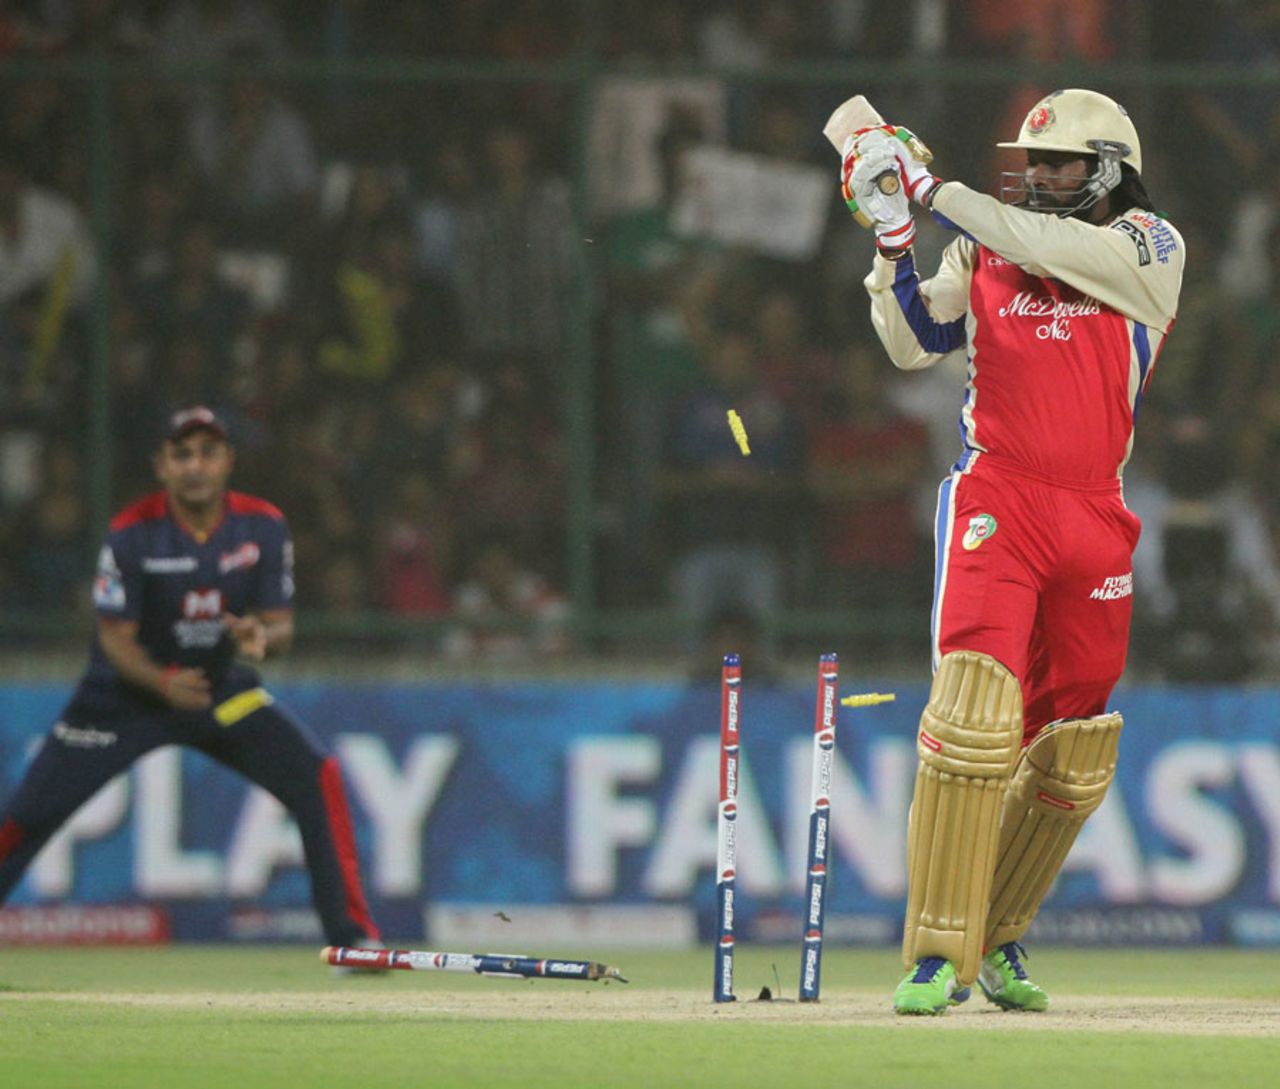 Chris Gayle's stumps are rattled by Irfan Pathan, Delhi Daredevils v Royal Challengers Bangalore, IPL 2013, Delhi, May 10, 2013